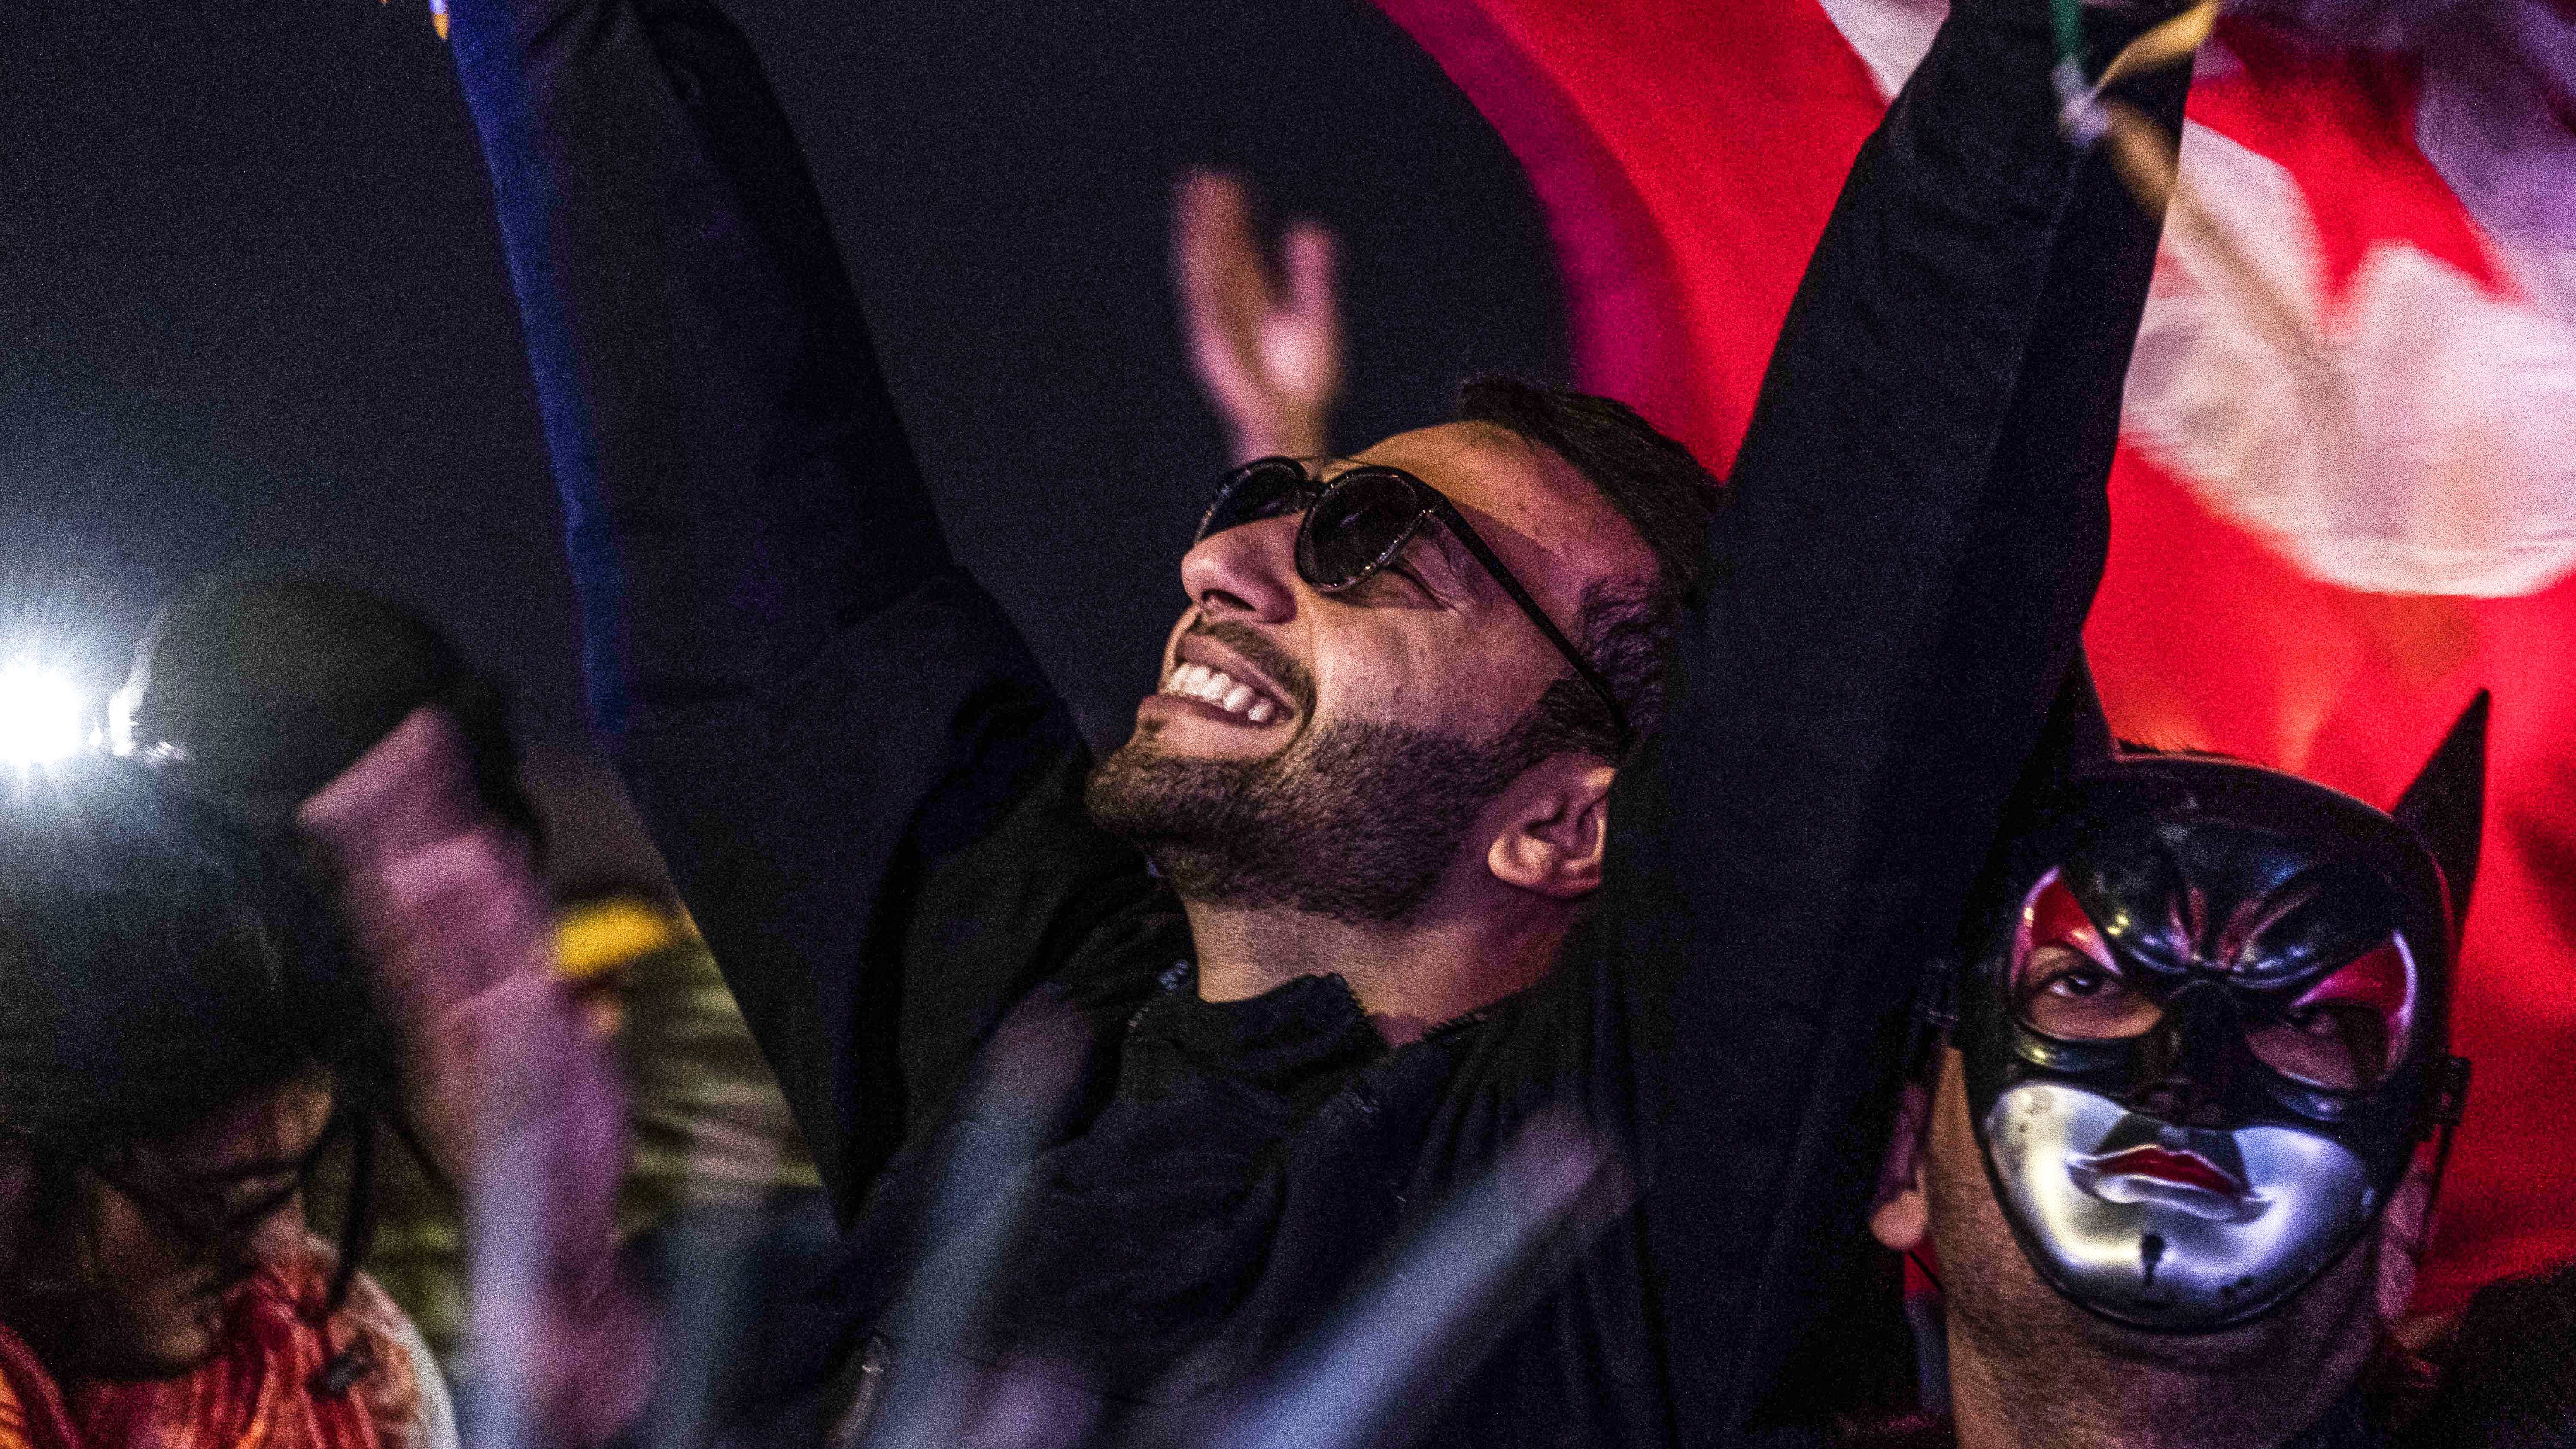 A Return to Normalcy at Tunisia’s Les Dunes Electroniques Music Festival